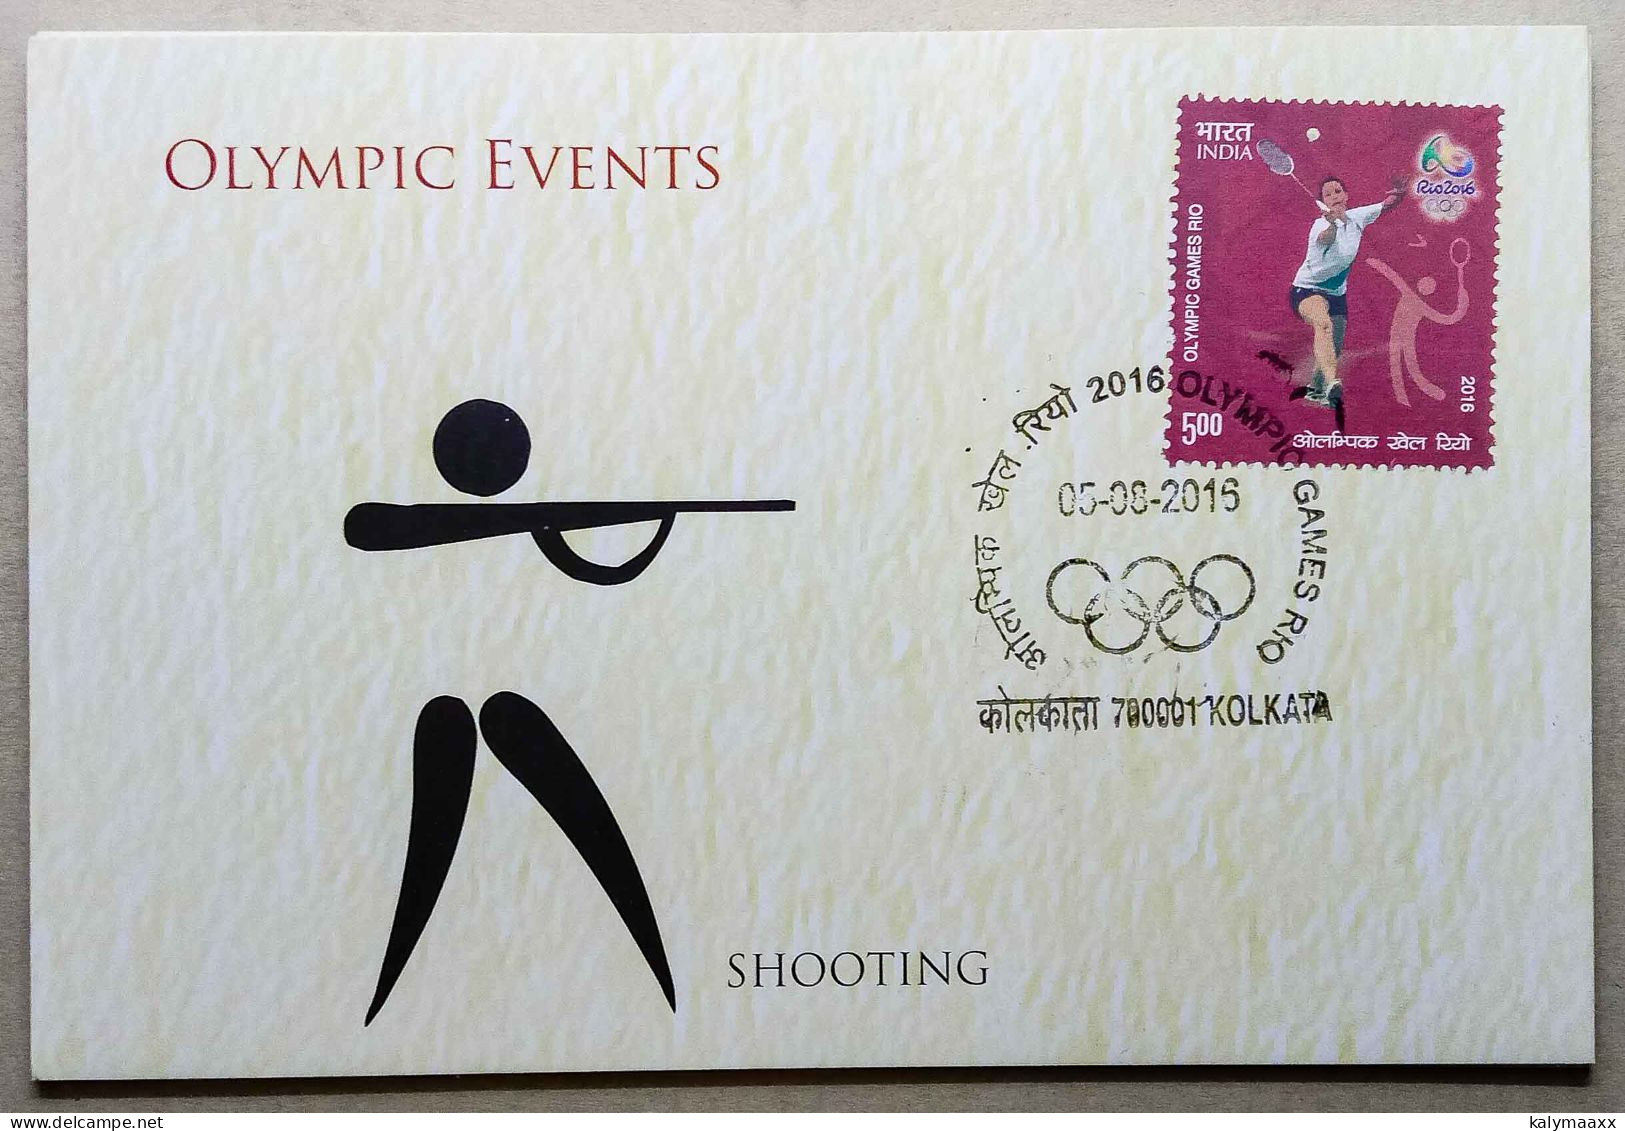 INDIA 2016 OLYMPIC EVENTS, SHOOTING, INDIA POST ISSUED POSTCARD...RARE - Schieten (Wapens)